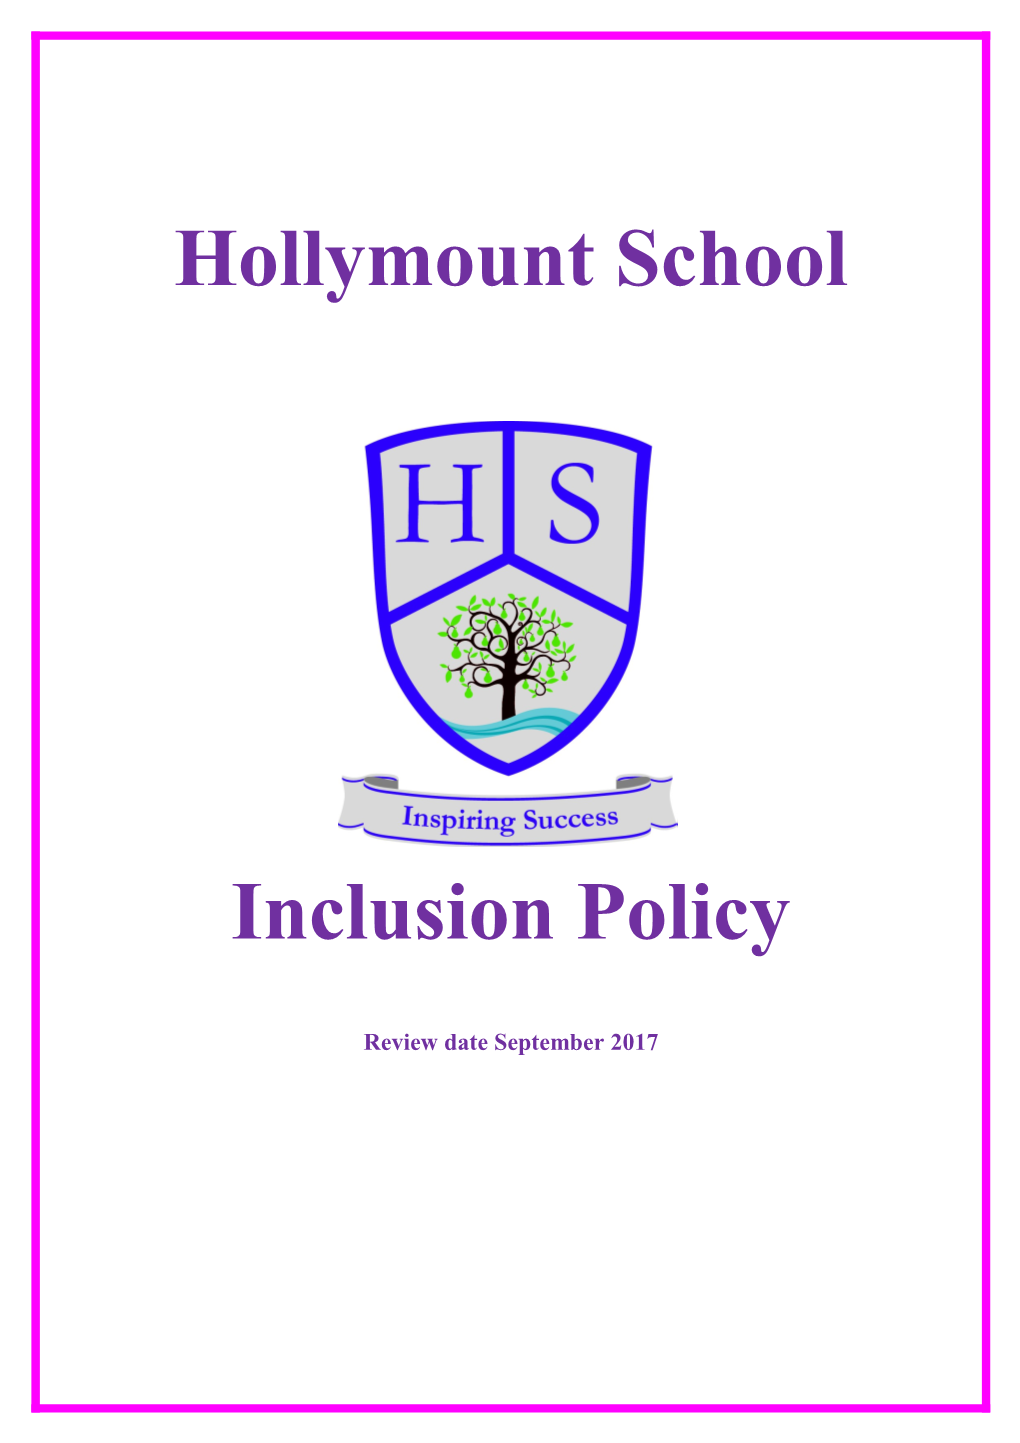 Model Sen and Inclusion Policy